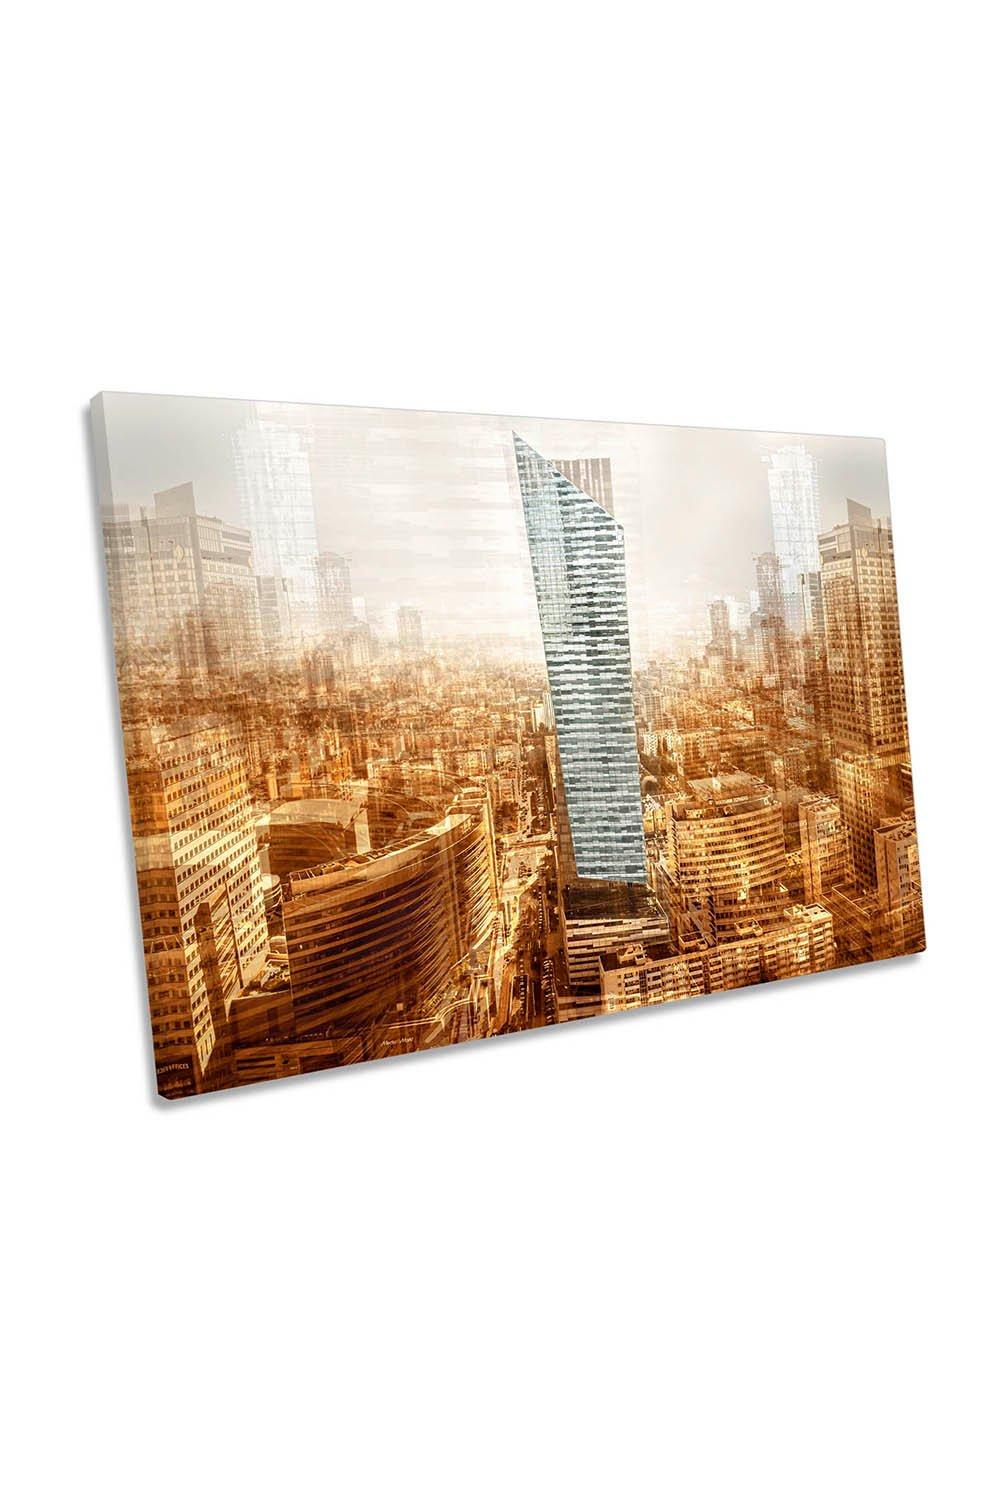 Warsaw Tower Poland City Abstract Canvas Wall Art Picture Print